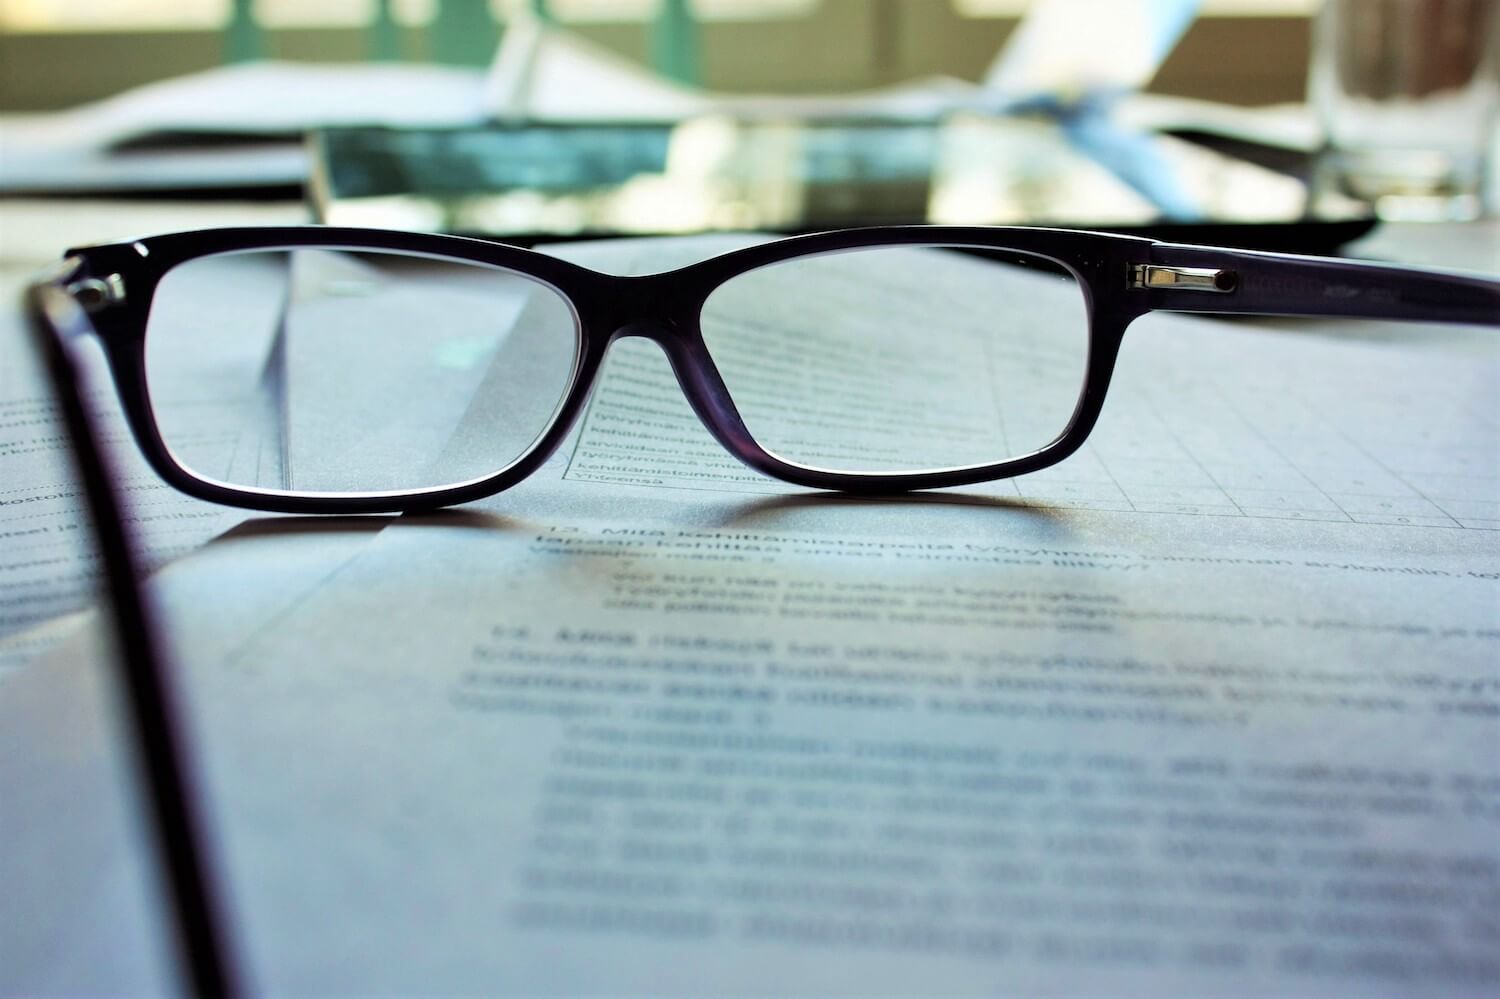 Black oval eye glasses on an out-of-focus stack of paper